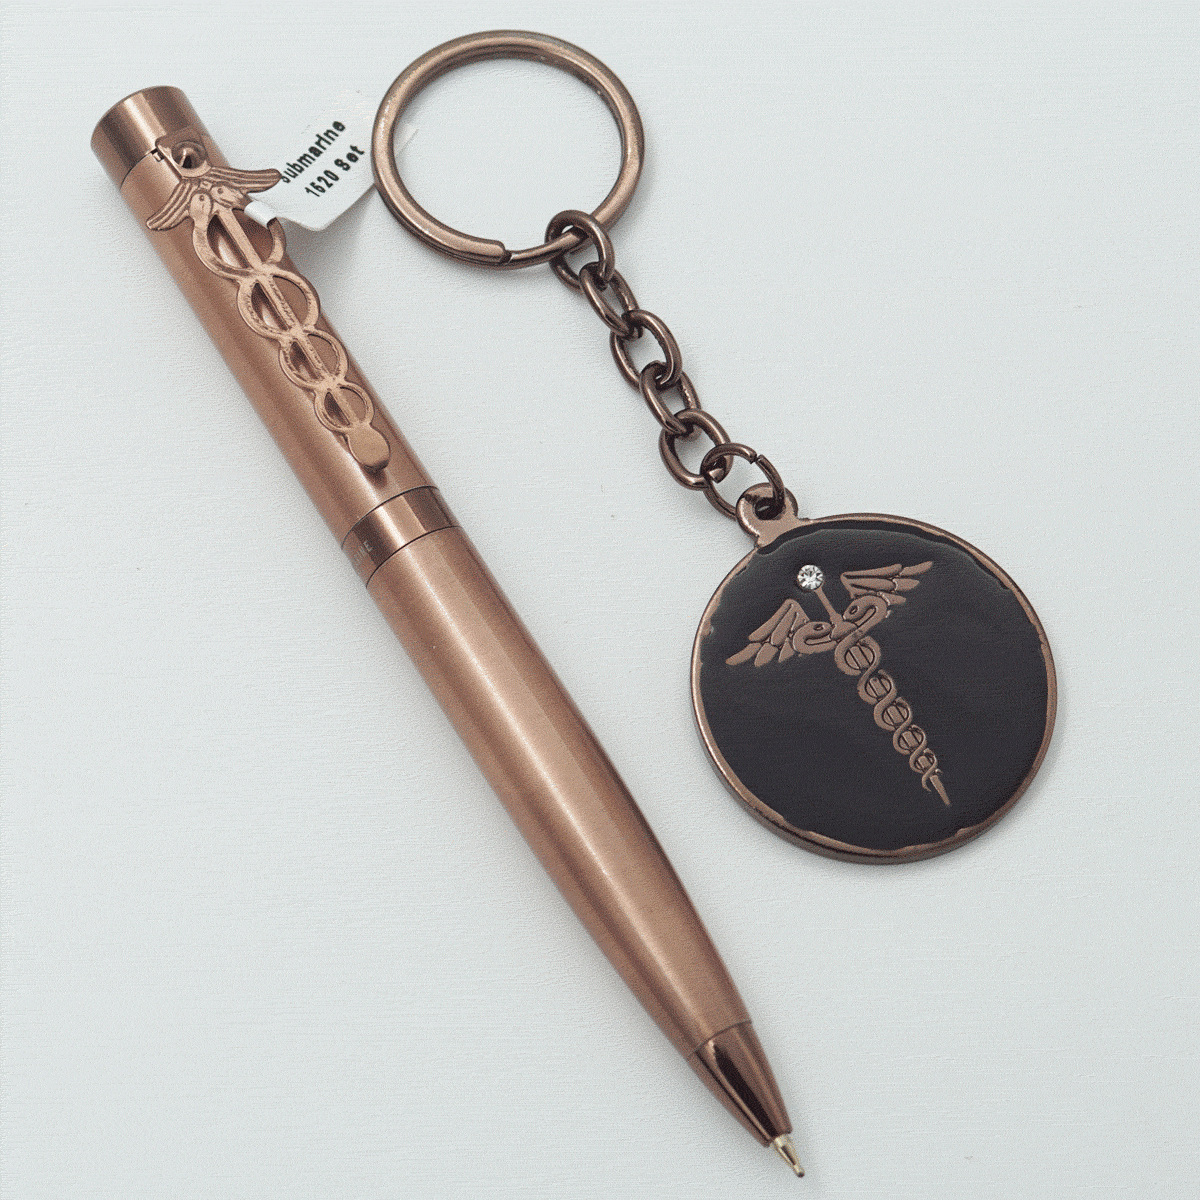 Submarine 1520 Copper Color Body With Cap Fine Tip Twist Type Ball Pen And Doctor Symbol Keychain Set SKU 23708